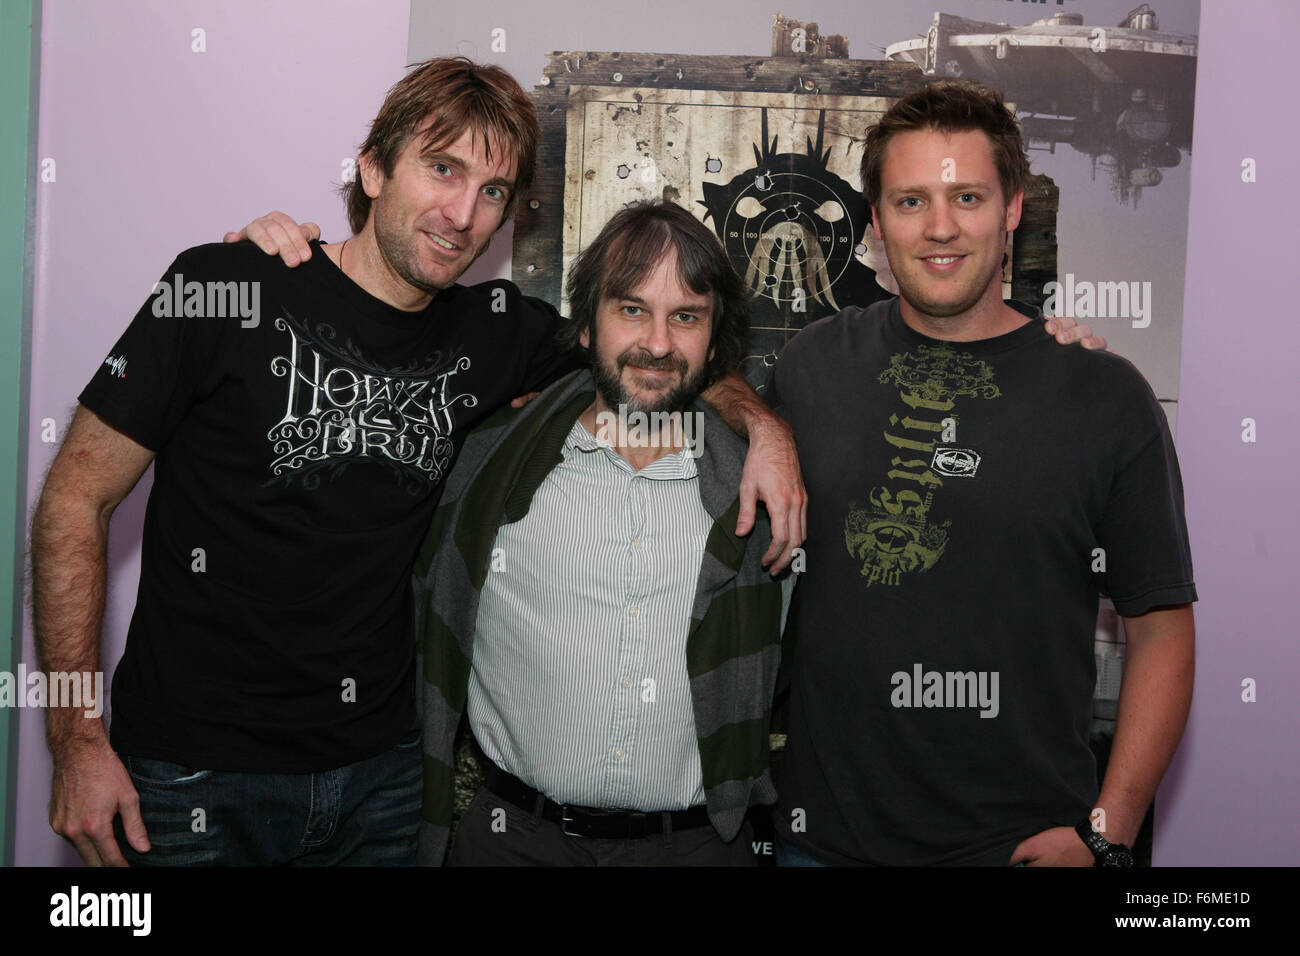 RELEASE DATE: August 19, 2009. MOVIE TITLE: District 9. STUDIO: TriStar Pictures. PLOT: An extraterrestrial race forced to live in slum-like conditions on Earth suddenly finds a kindred spirit in a government agent who is exposed to their biotechnology. PICTURED: Sharlto Copley, Producer PETER JACKSON and Director NEILL BLOMKAMP Stock Photo